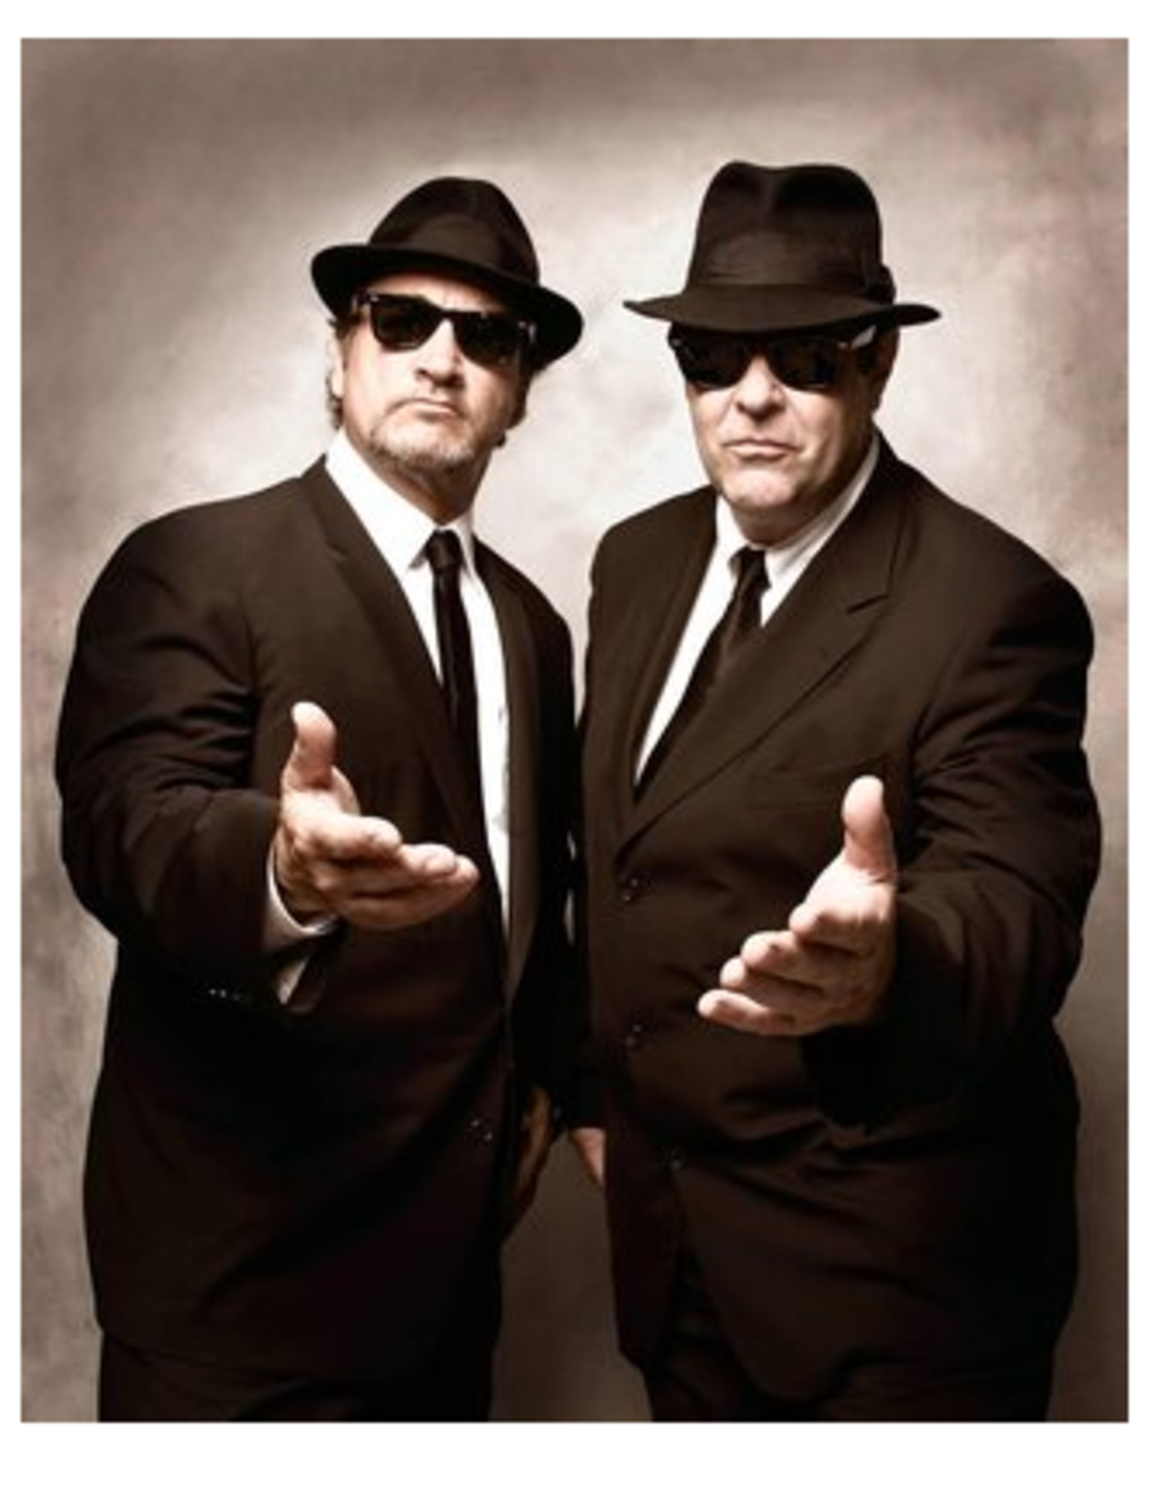 The blues brothers - Trentino Cultura